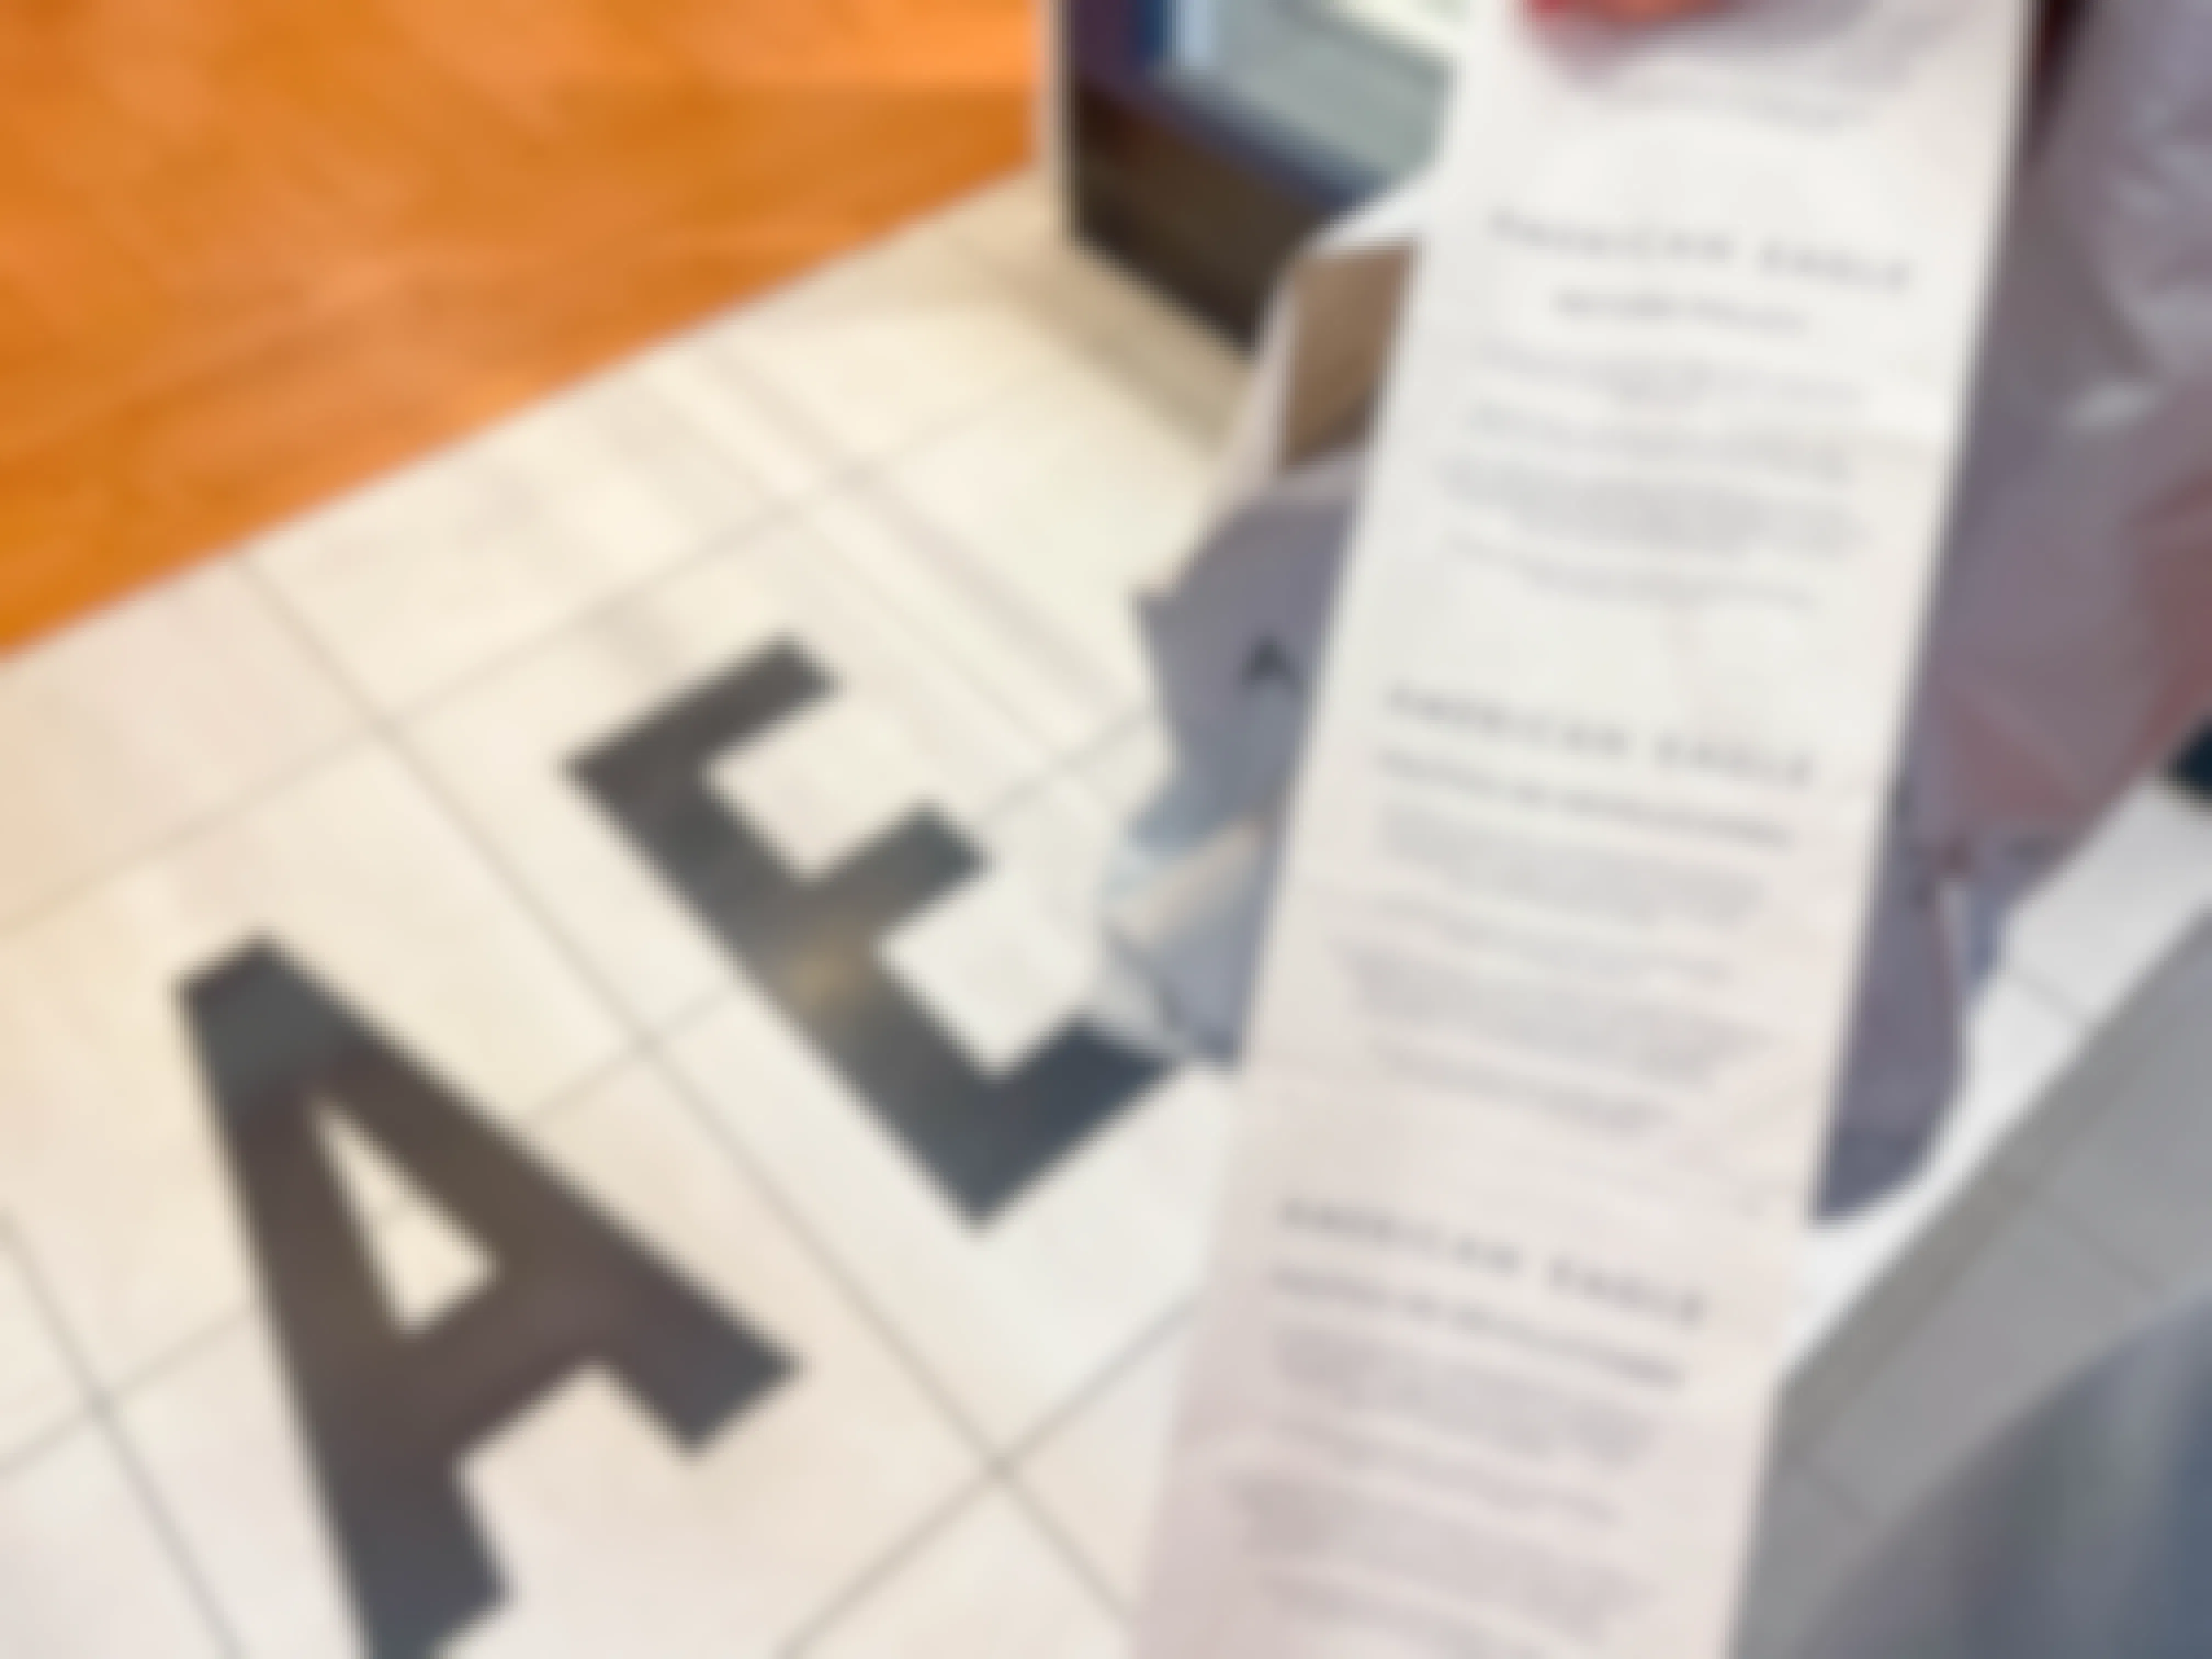 n american eagle receipt being held above store area 